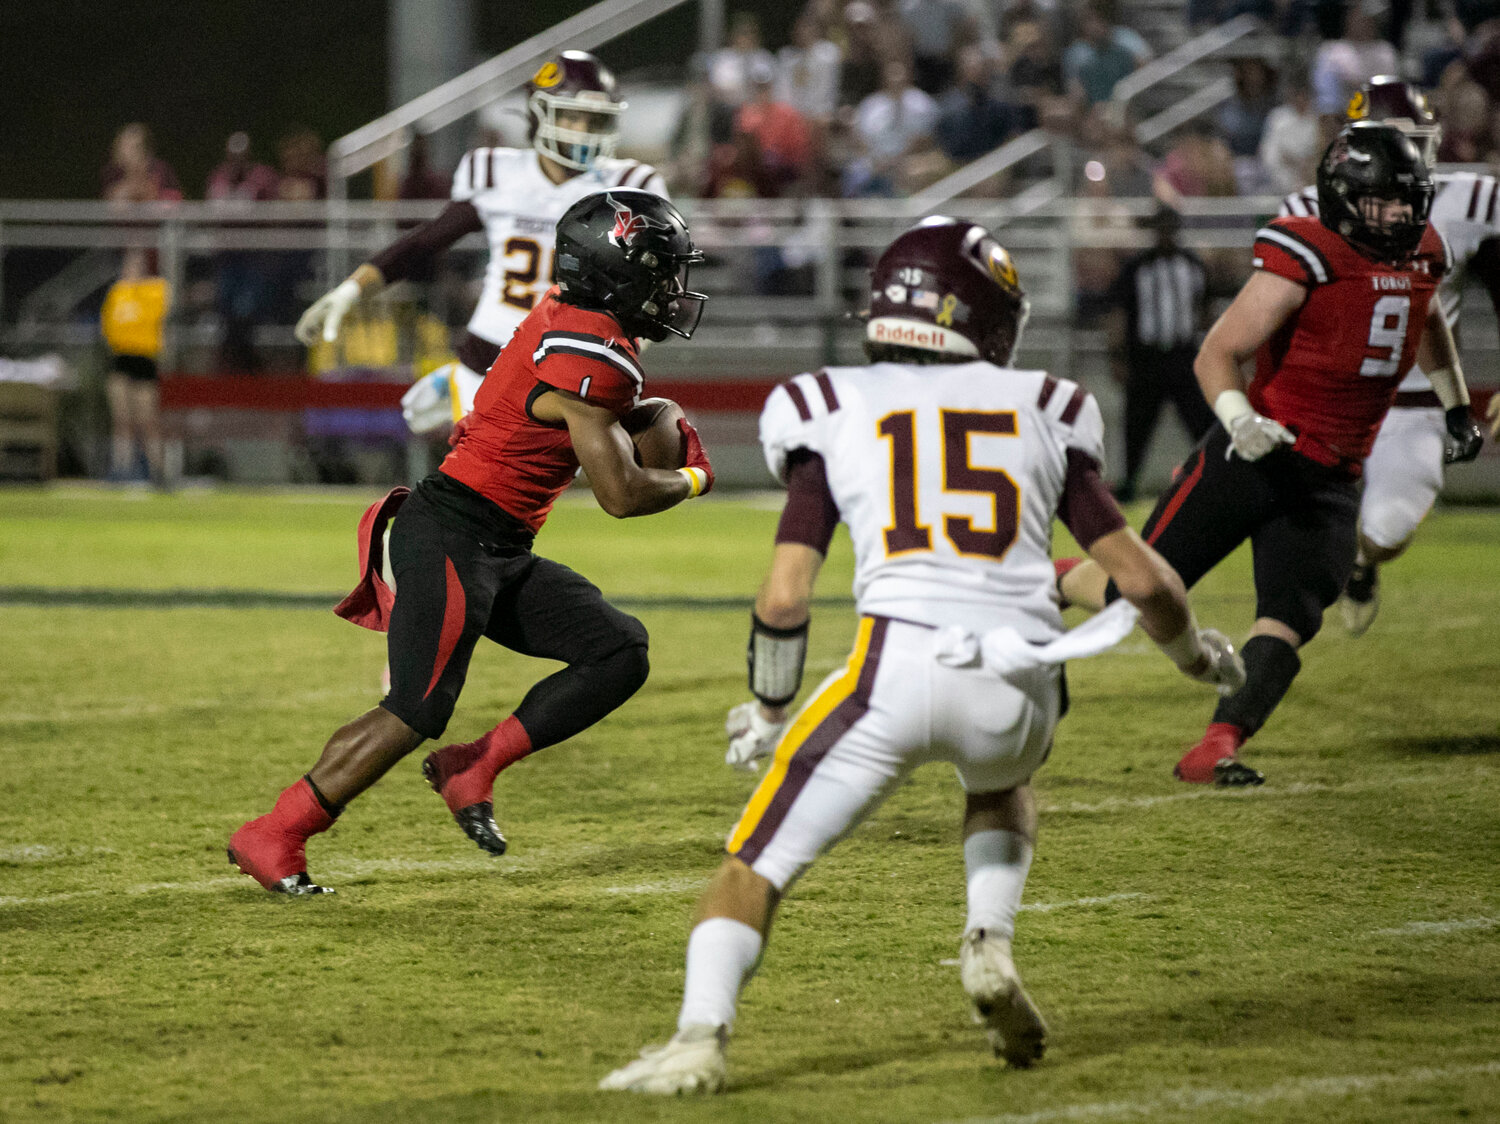 Toro junior Nehemiah Hixon makes a cut and finds running room on his punt return for a touchdown in the first quarter of Spanish Fort’s region game against Robertsdale at home on Friday, Oct. 20. Hixon added a 20-yard rushing touchdown on offense to help the Toros take down the Golden Bears 45-0.